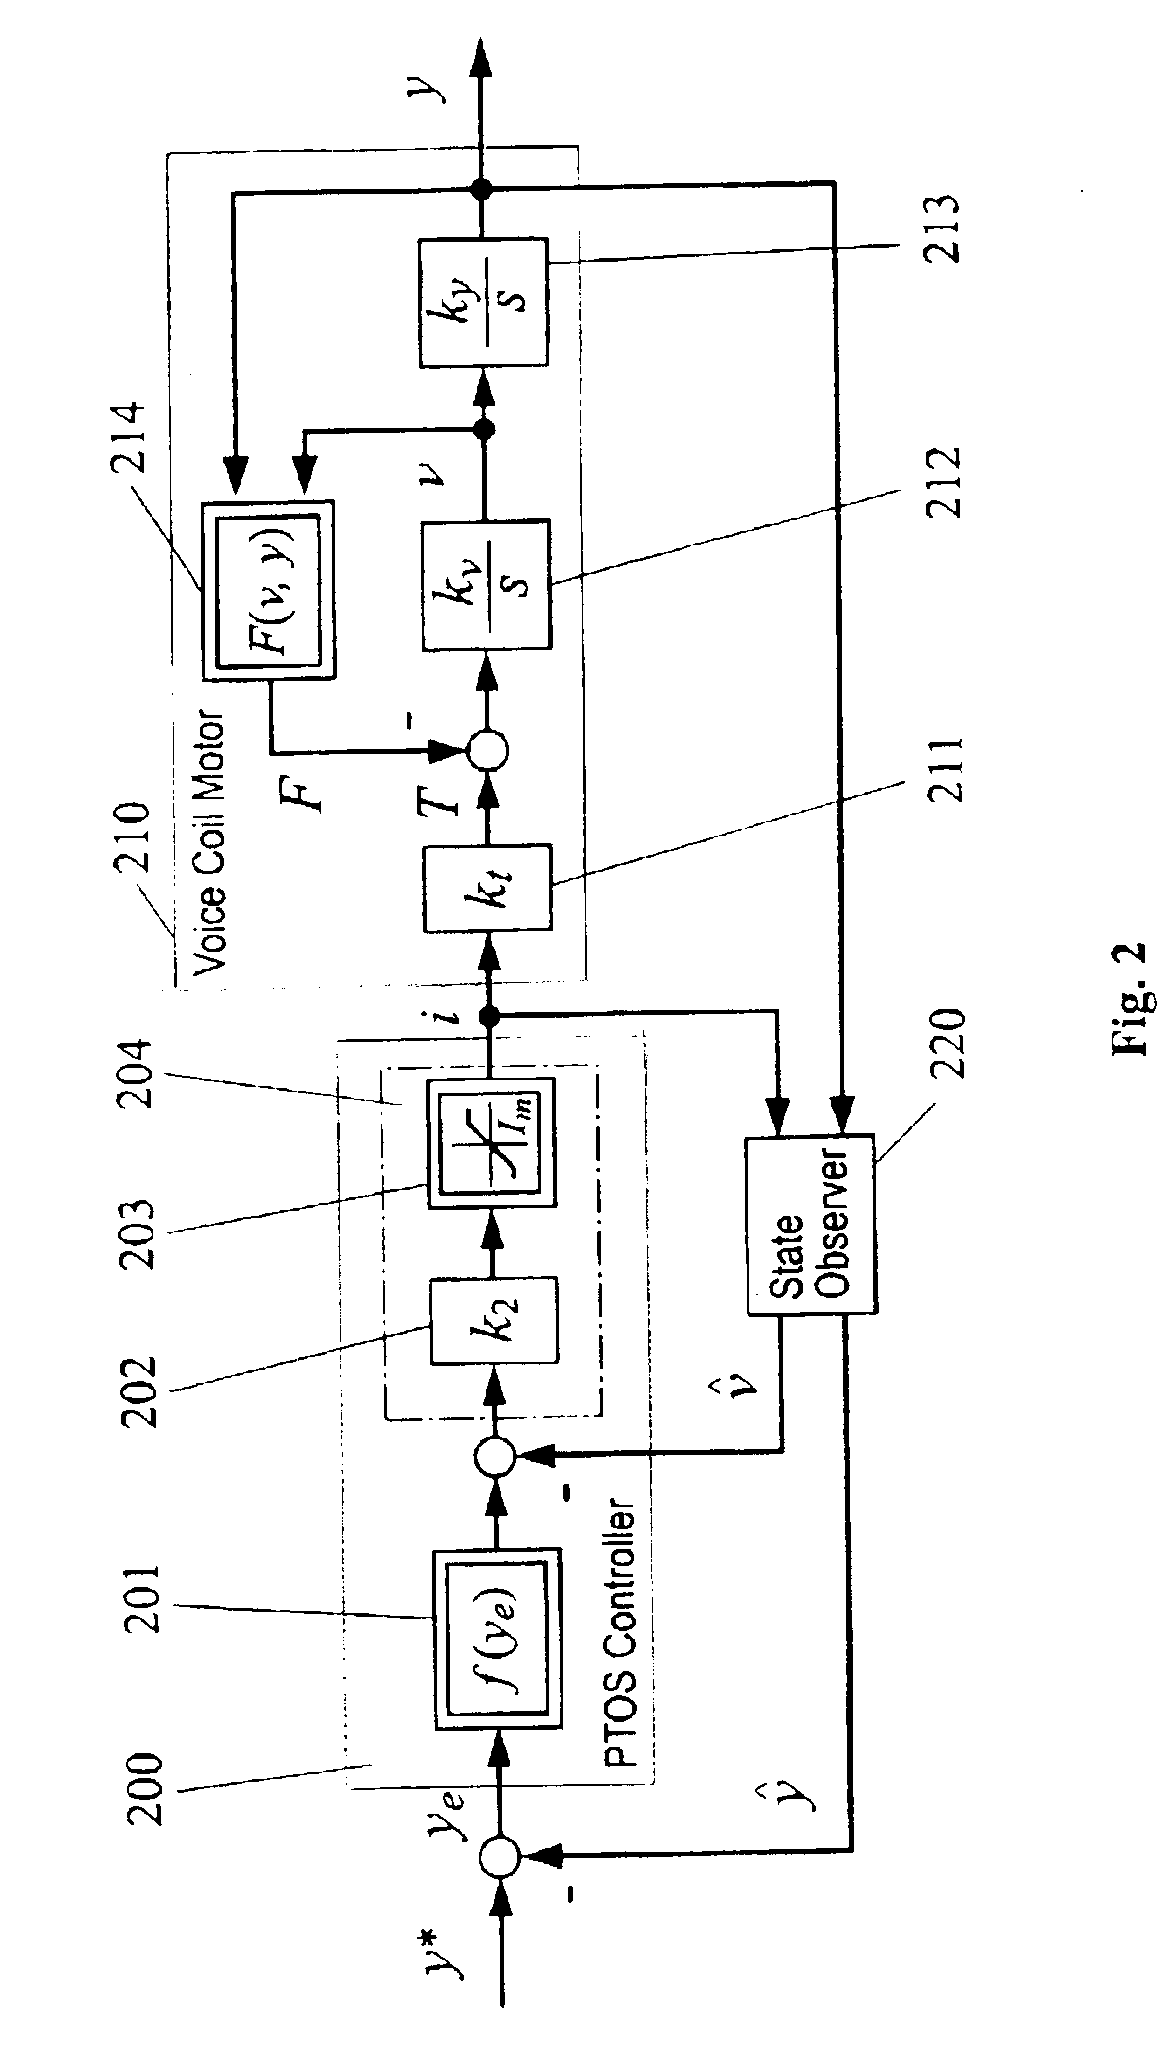 Robust triple-mode compensator for hard disk drives with dynamic friction